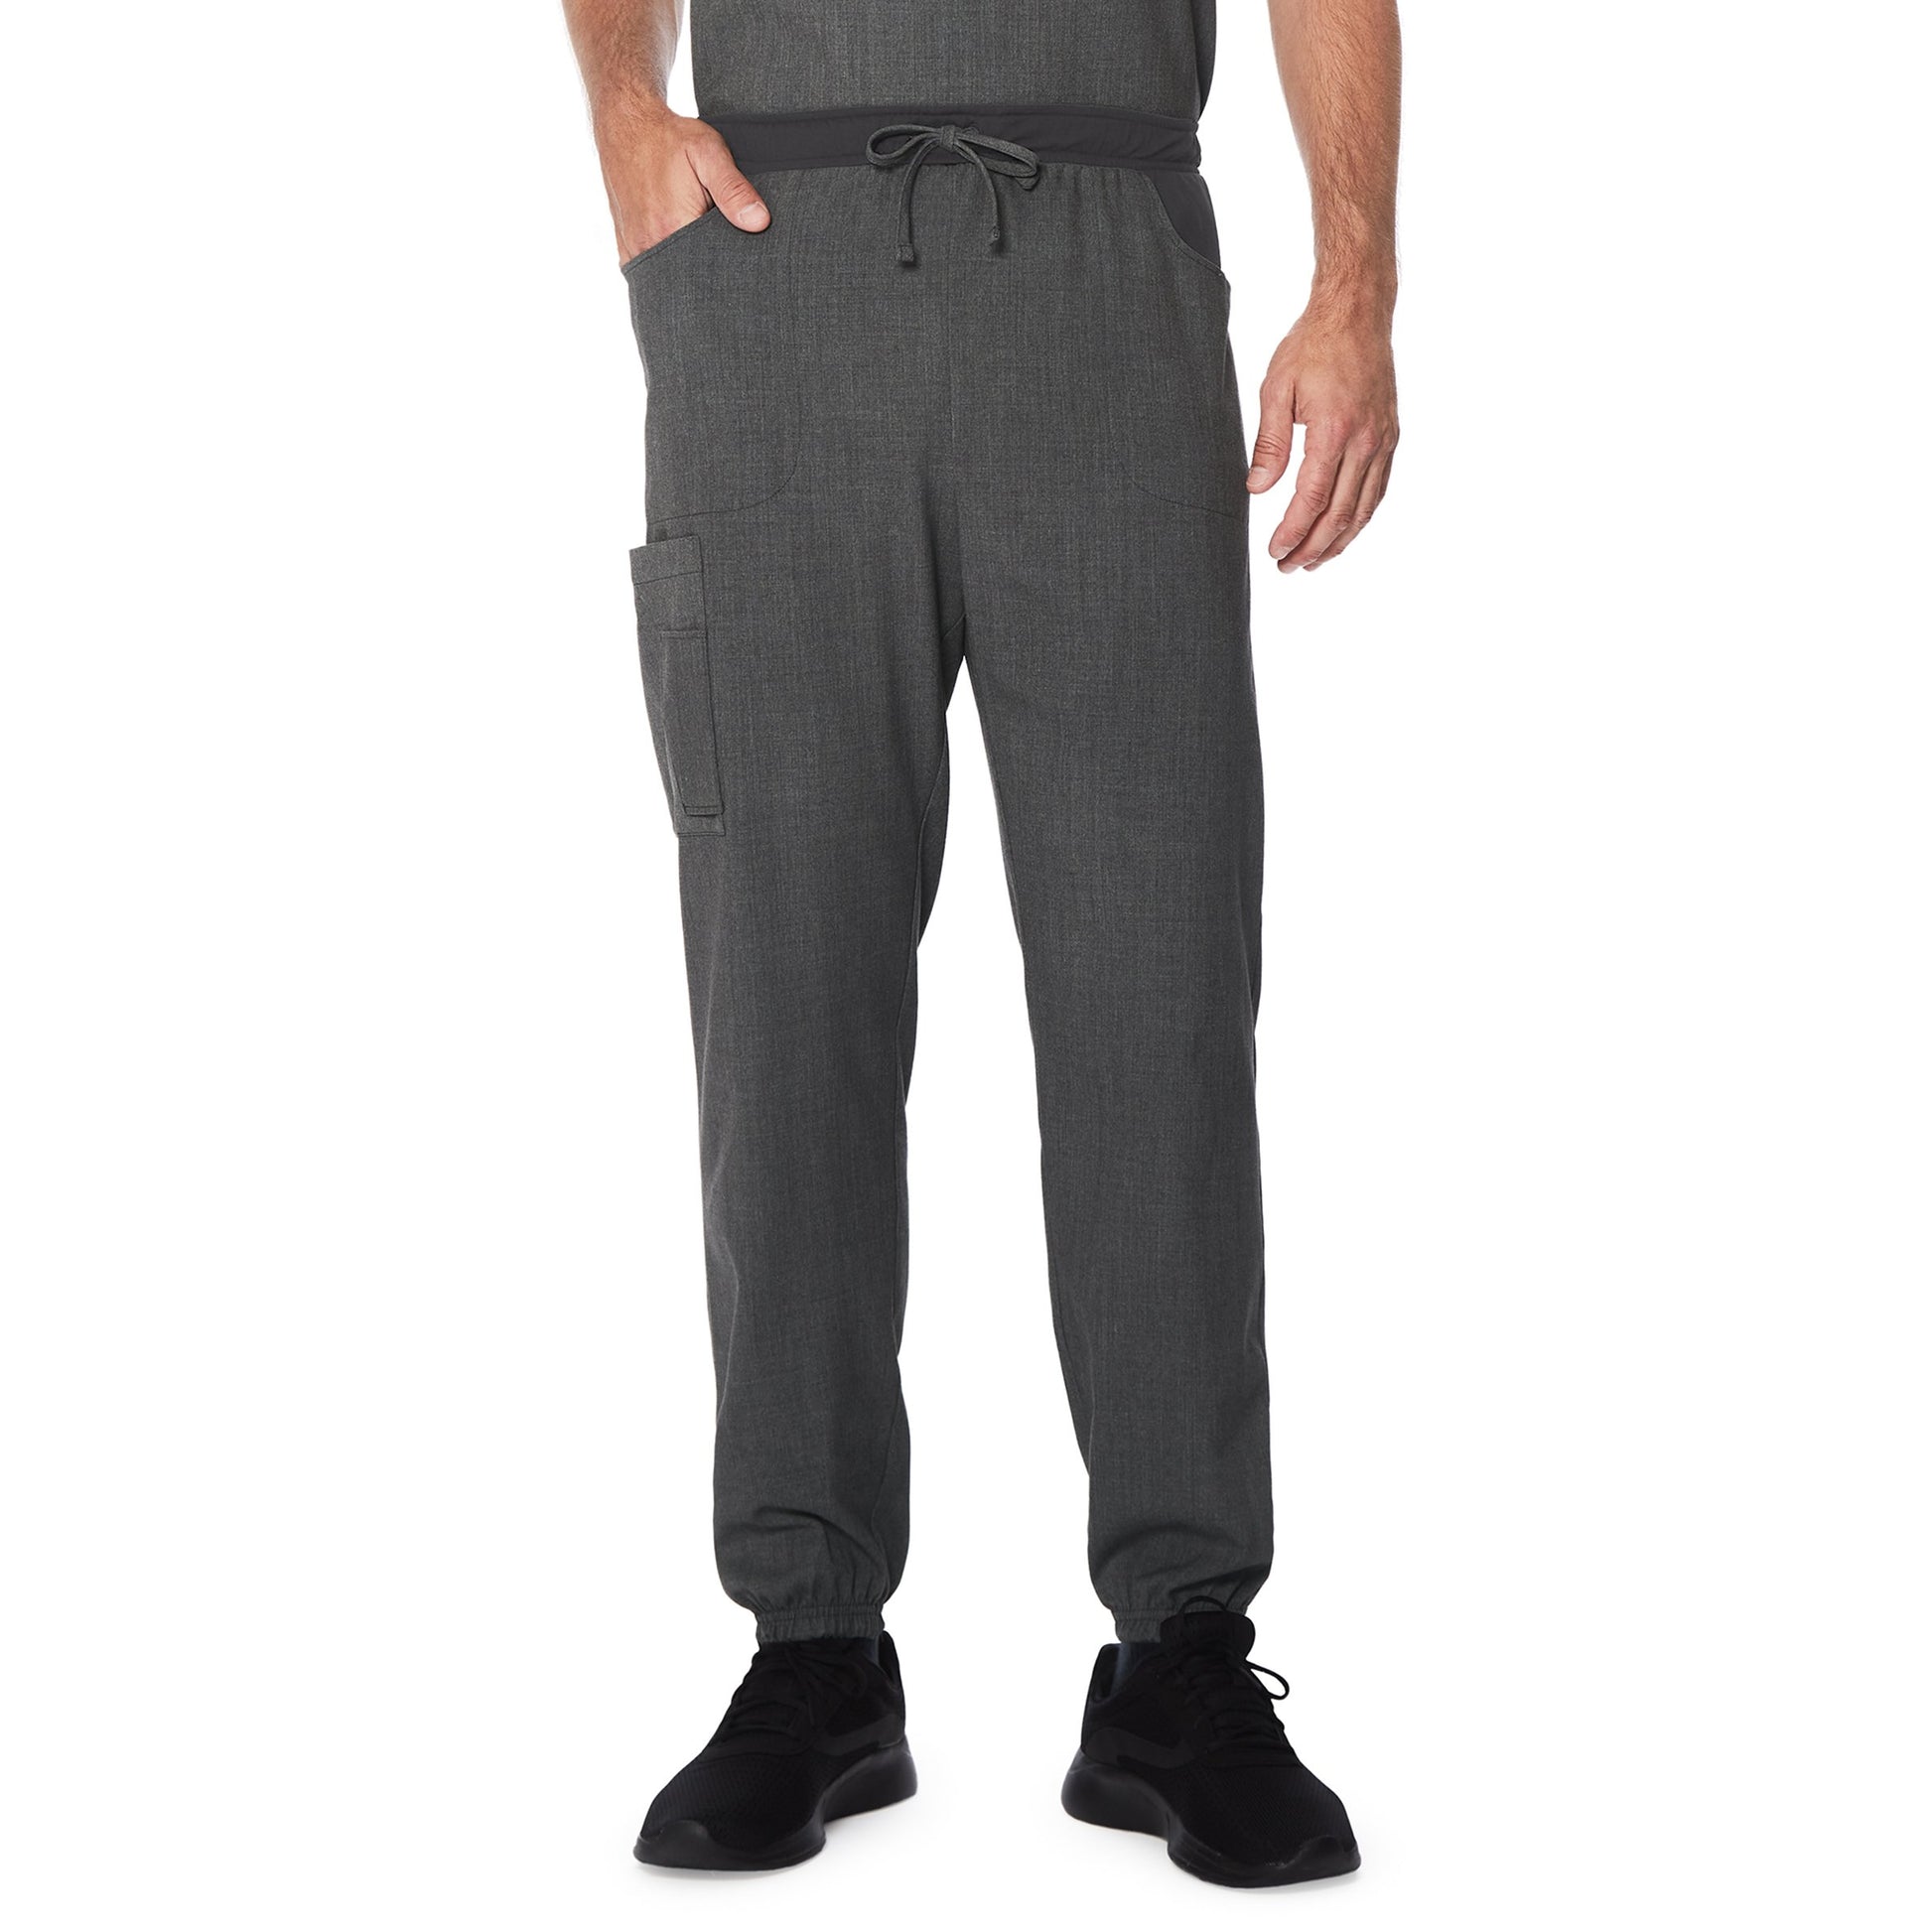 Charcoal Heather;Model is wearing size M. He is 6'2", Waist 32", Inseam 32".@A man wearing a charcoal heather scrub jogger pant.